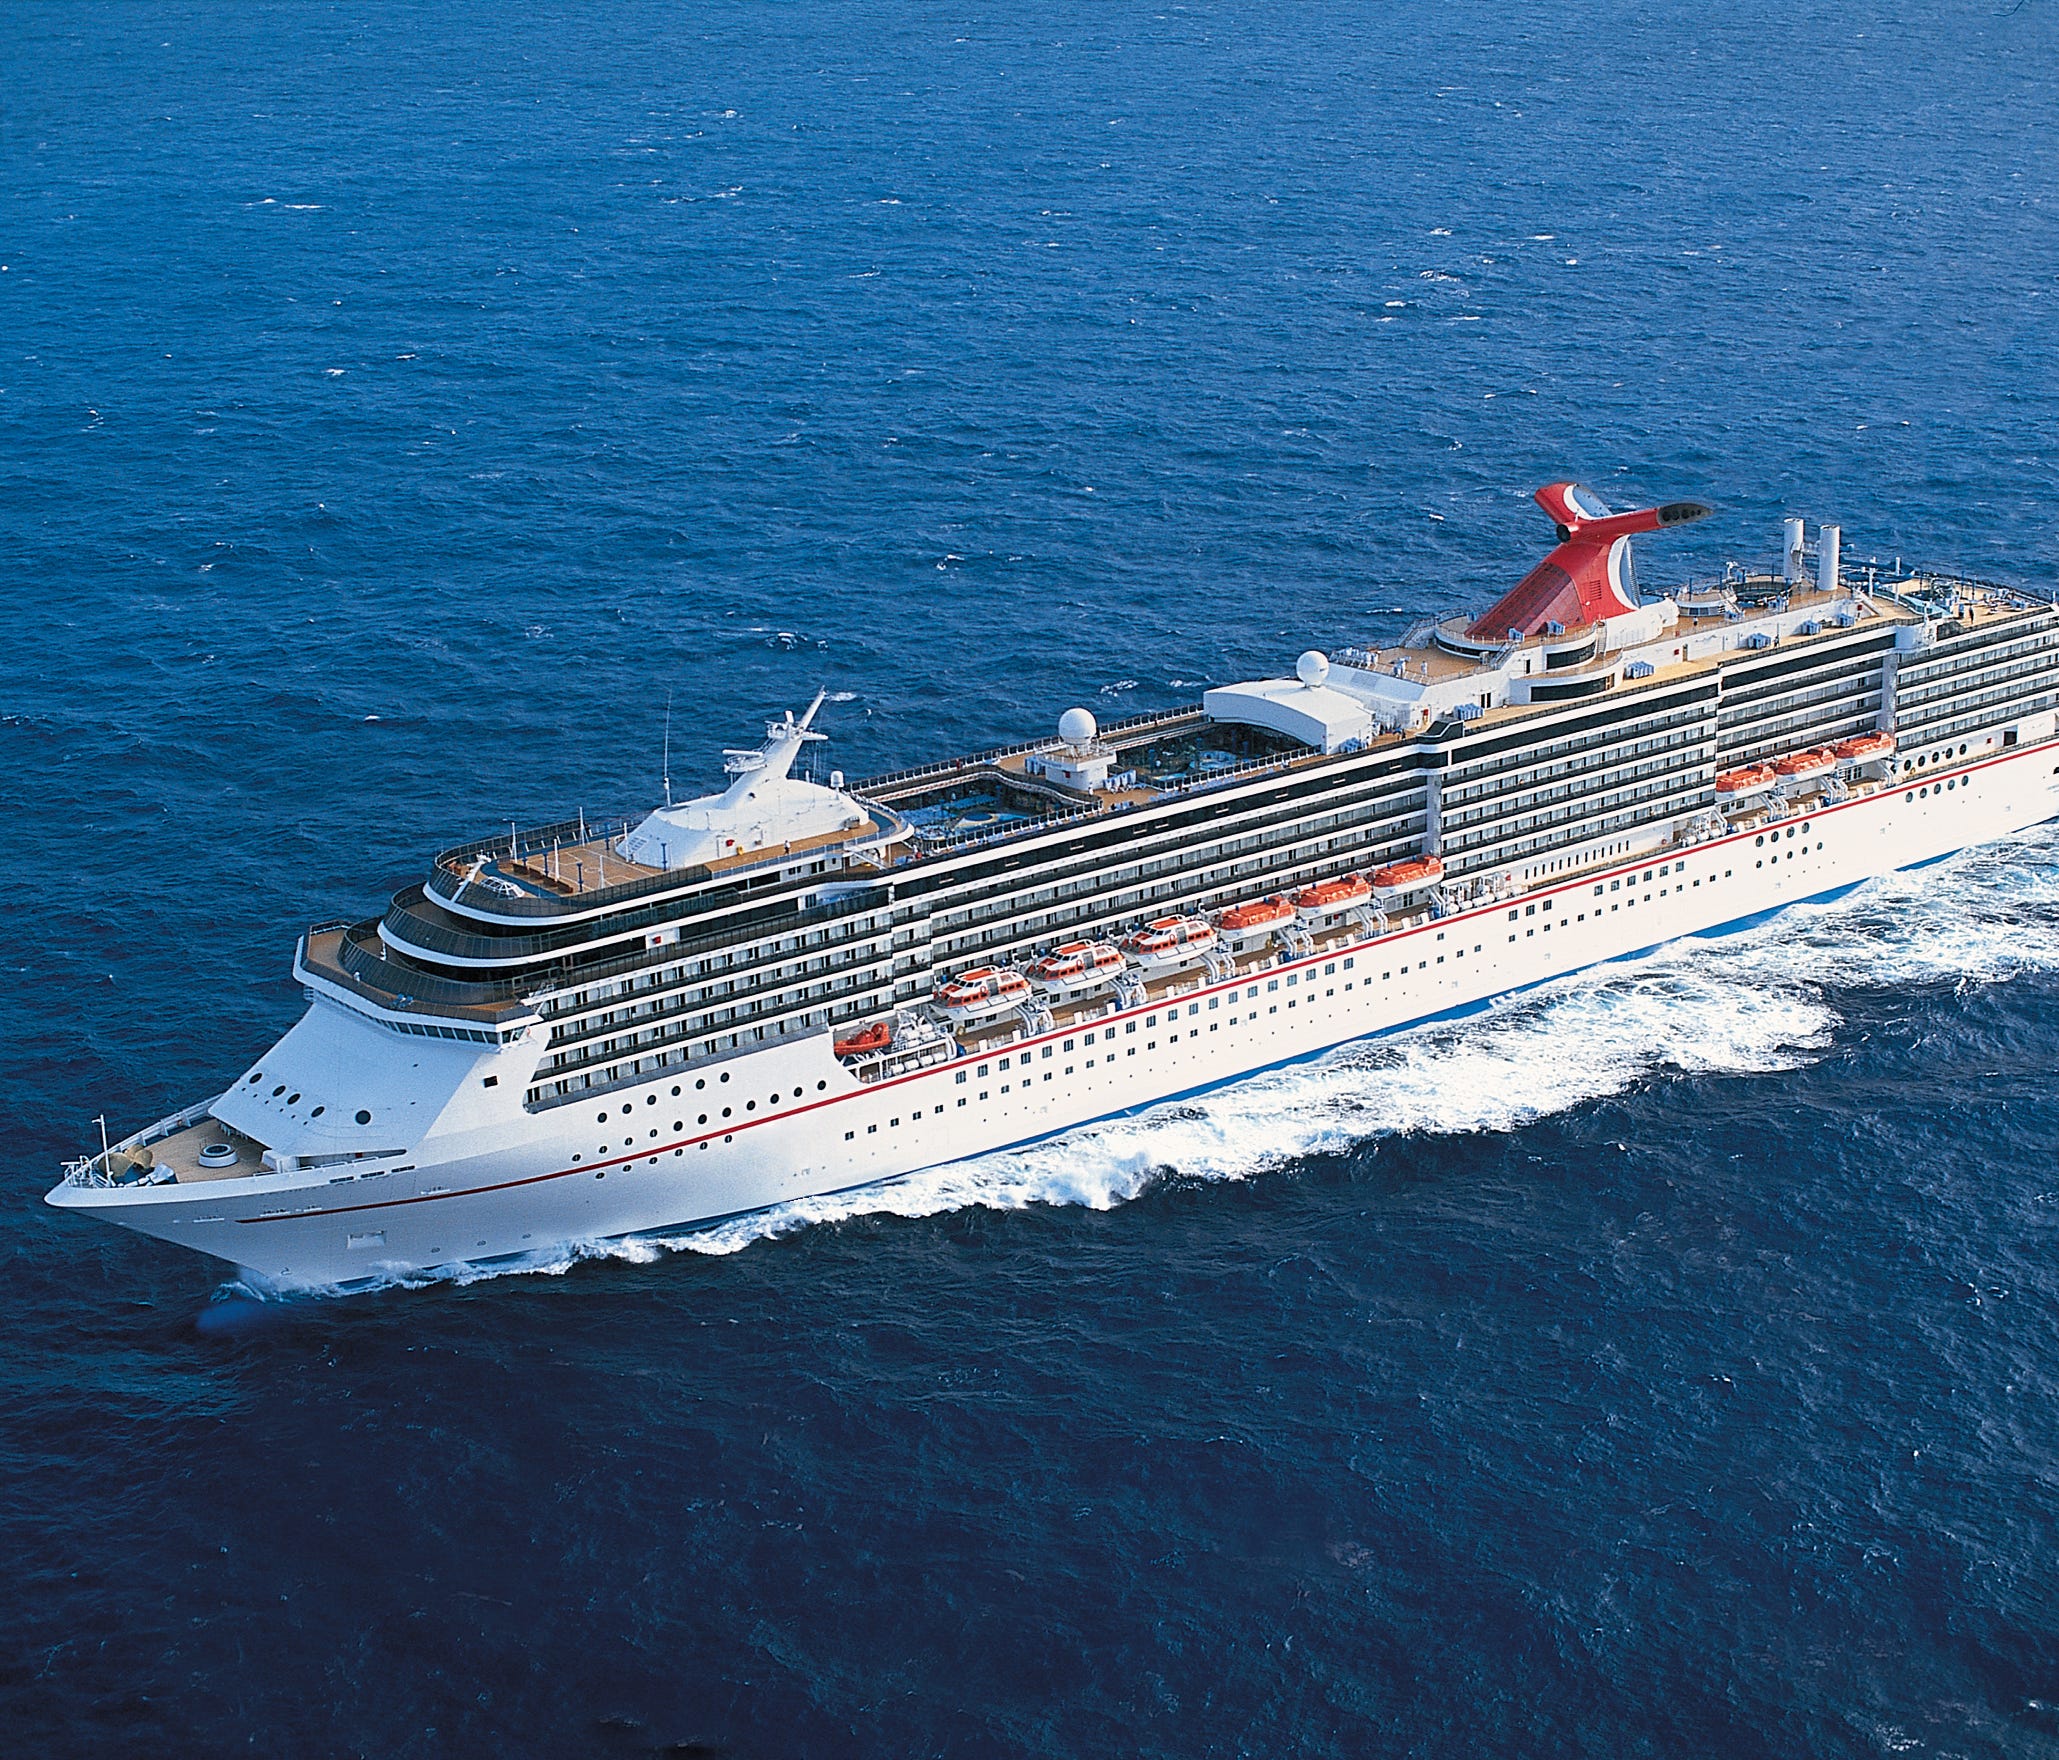 Also unveiled in 2001, the 88,500-ton Carnival Spirit was the original vessel in Carnival's Spirit Class. It carries 2,124 passengers, based on double occupancy, and sails in Australia.